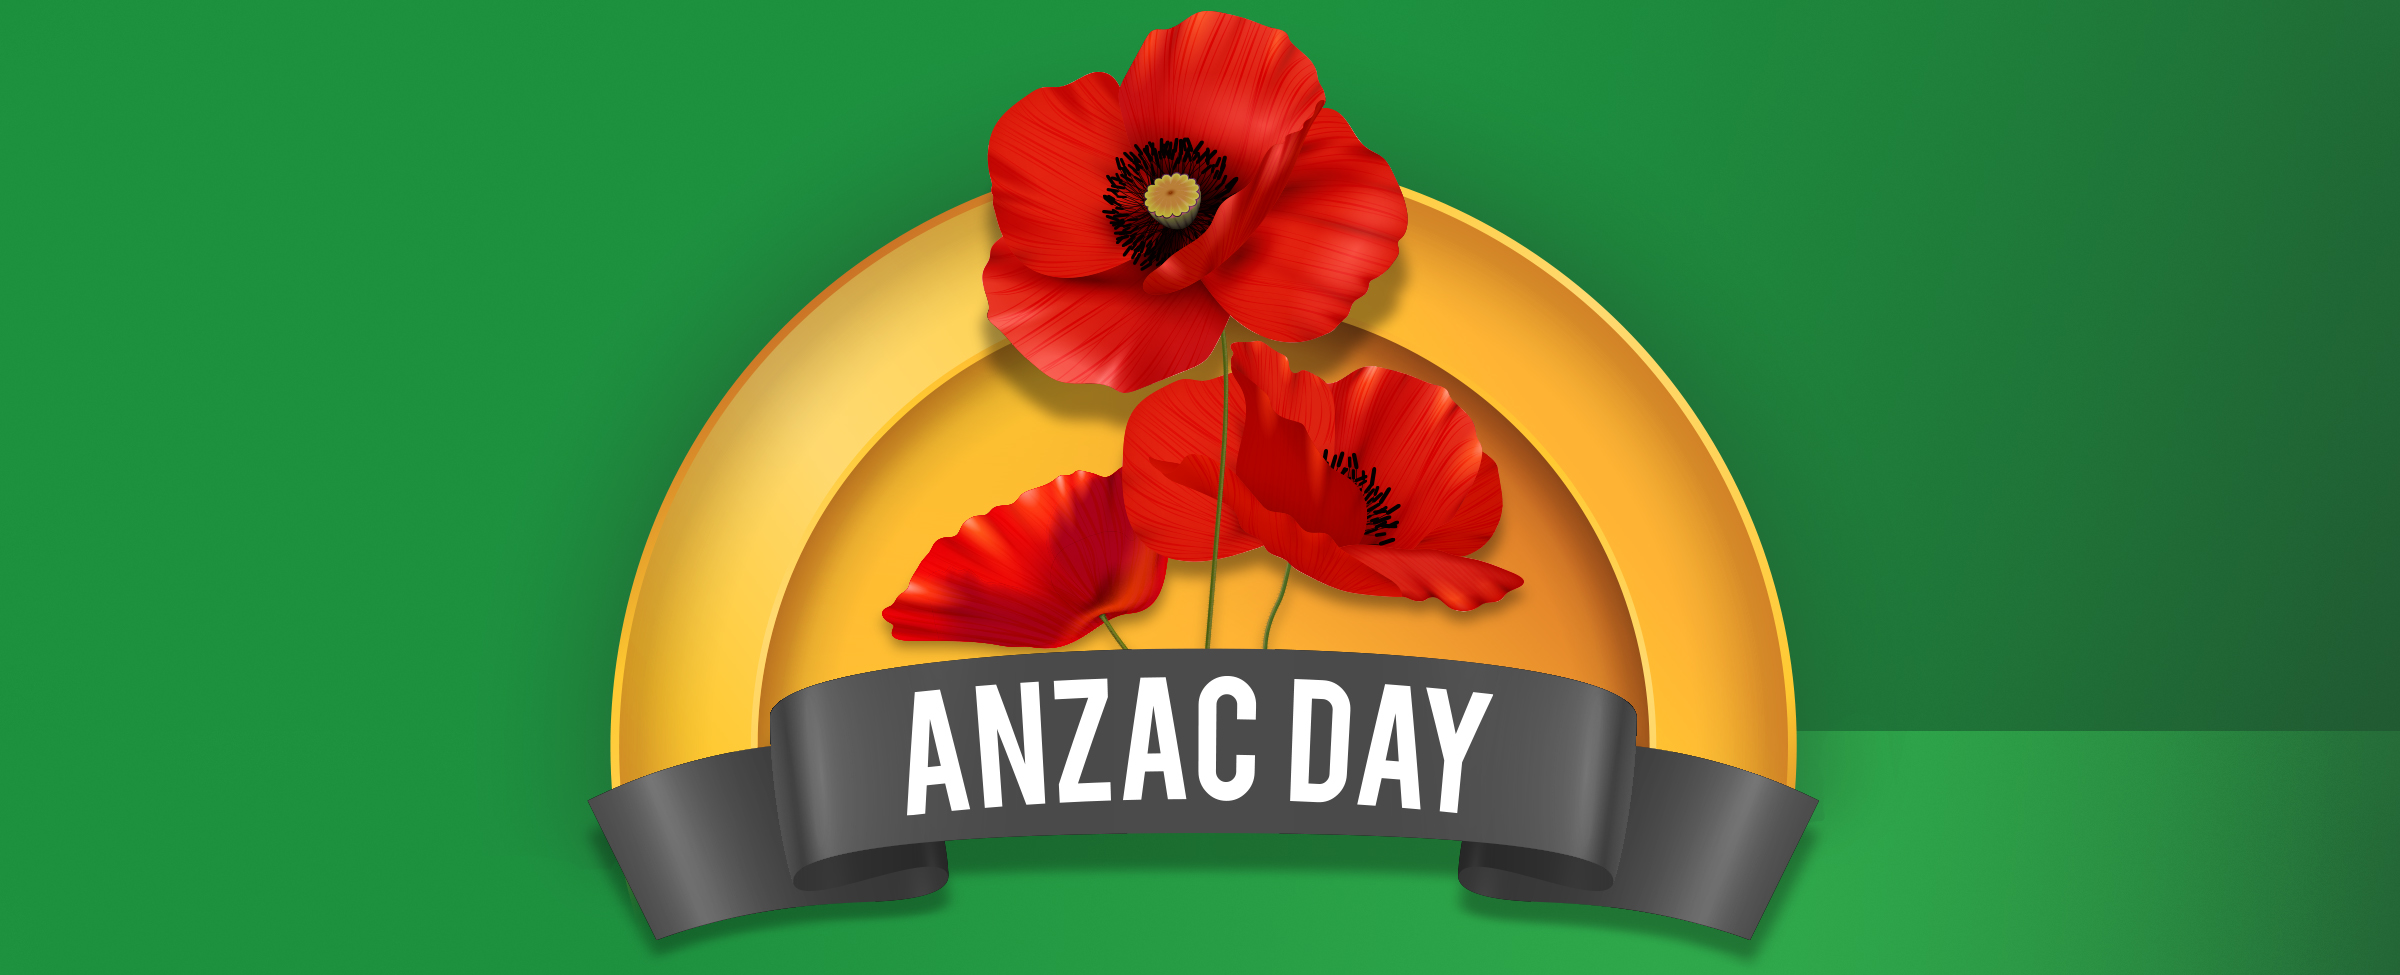 Three red poppies with the wording ‘Anzac Day’ are centred on a green background.